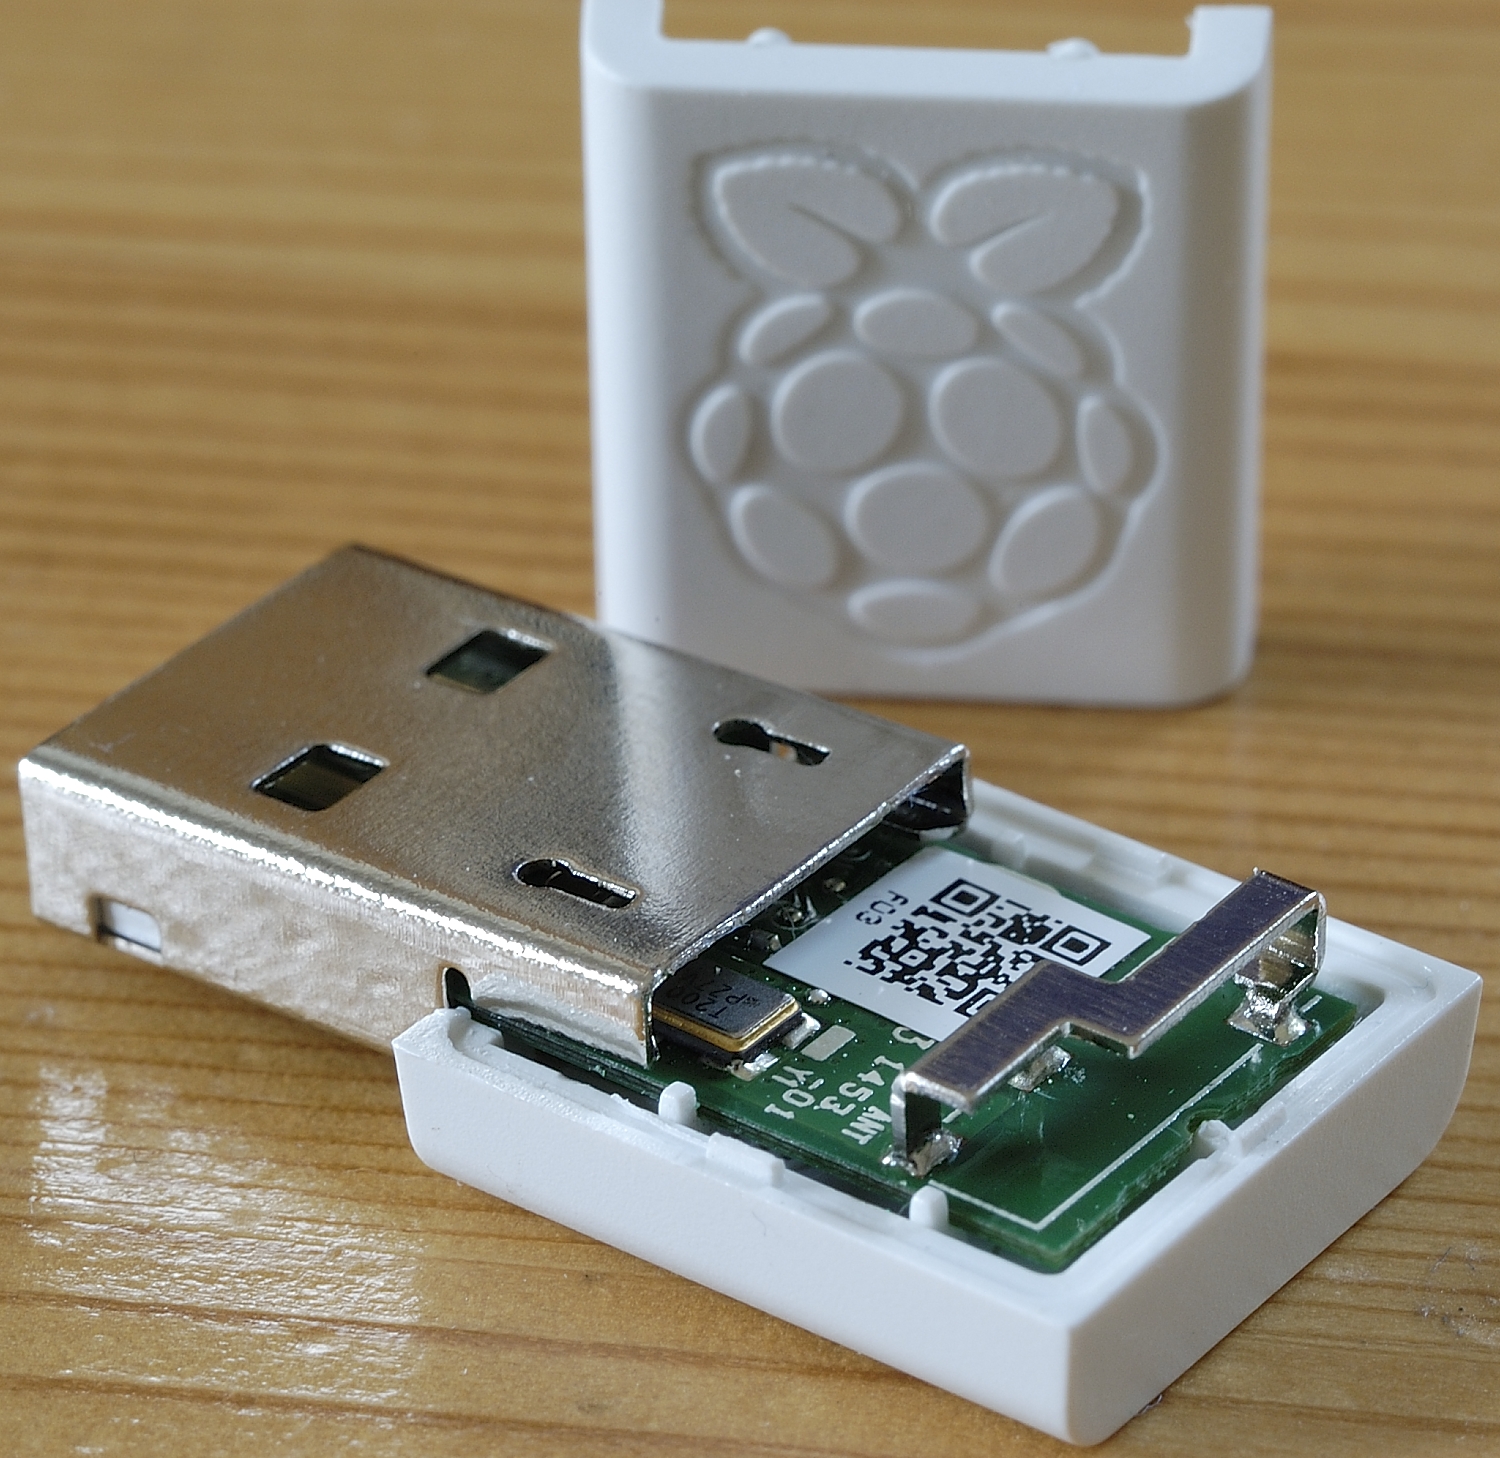 Inside the RPi WiFi dongle, showing antenna